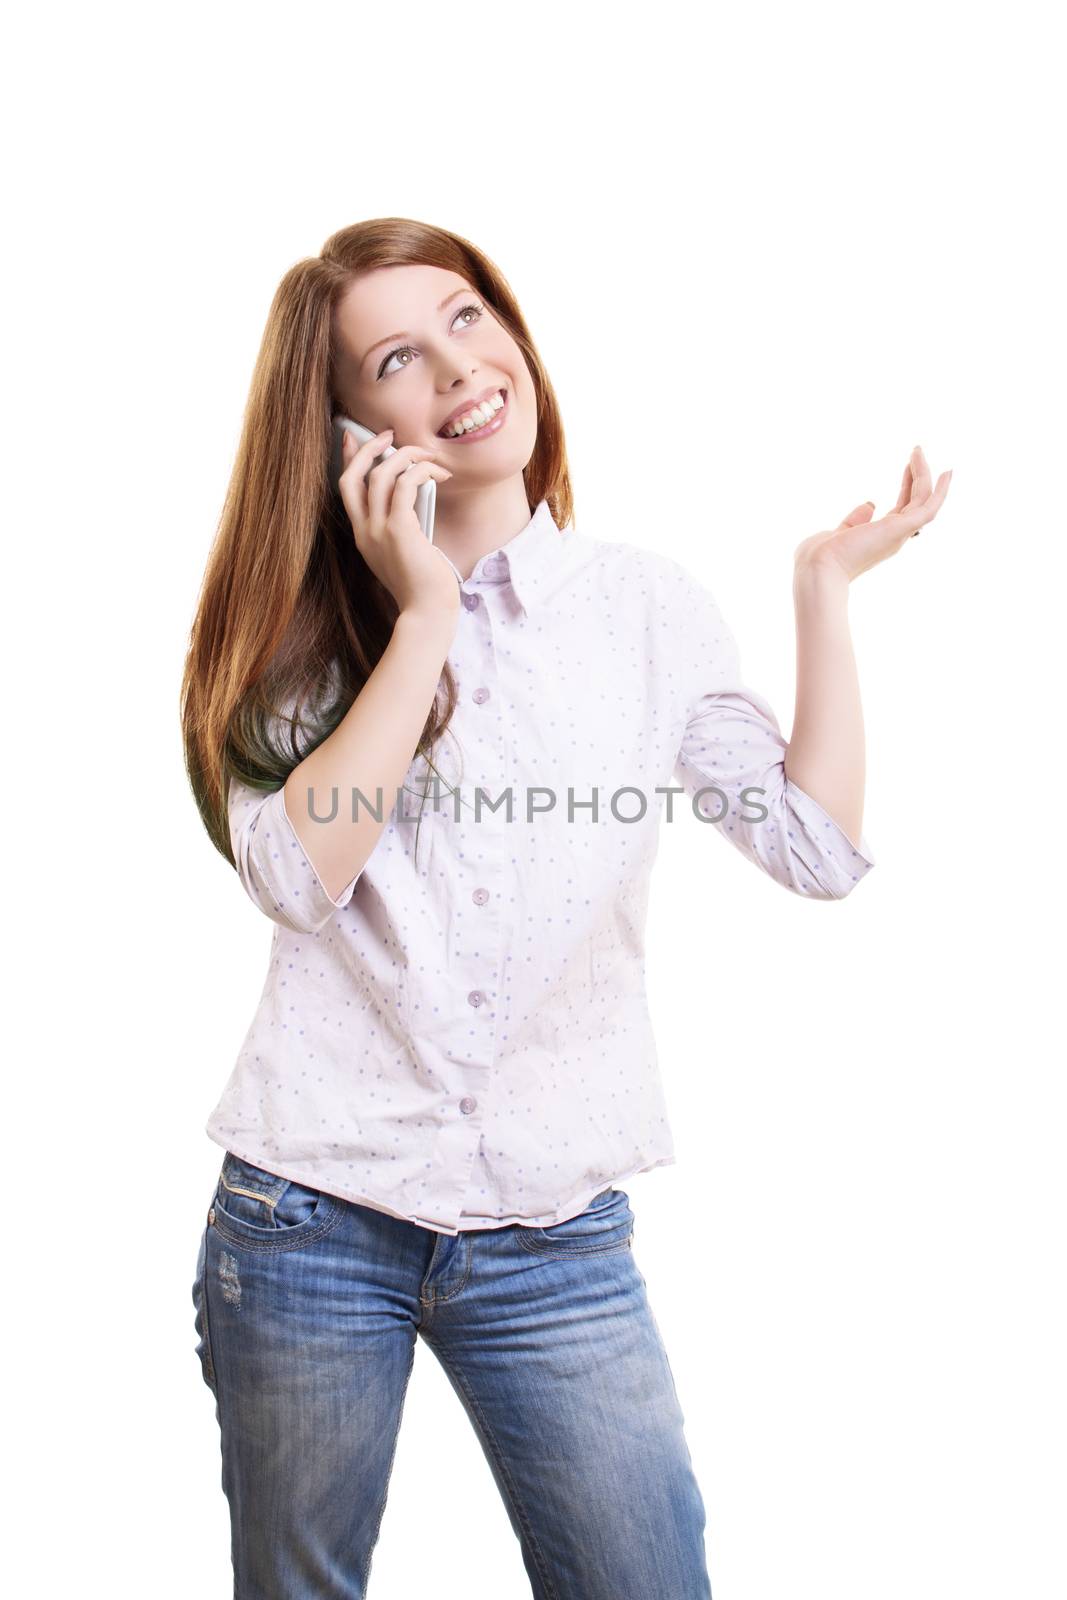 Young woman talking on a phone and gesturing with one hand by Mendelex